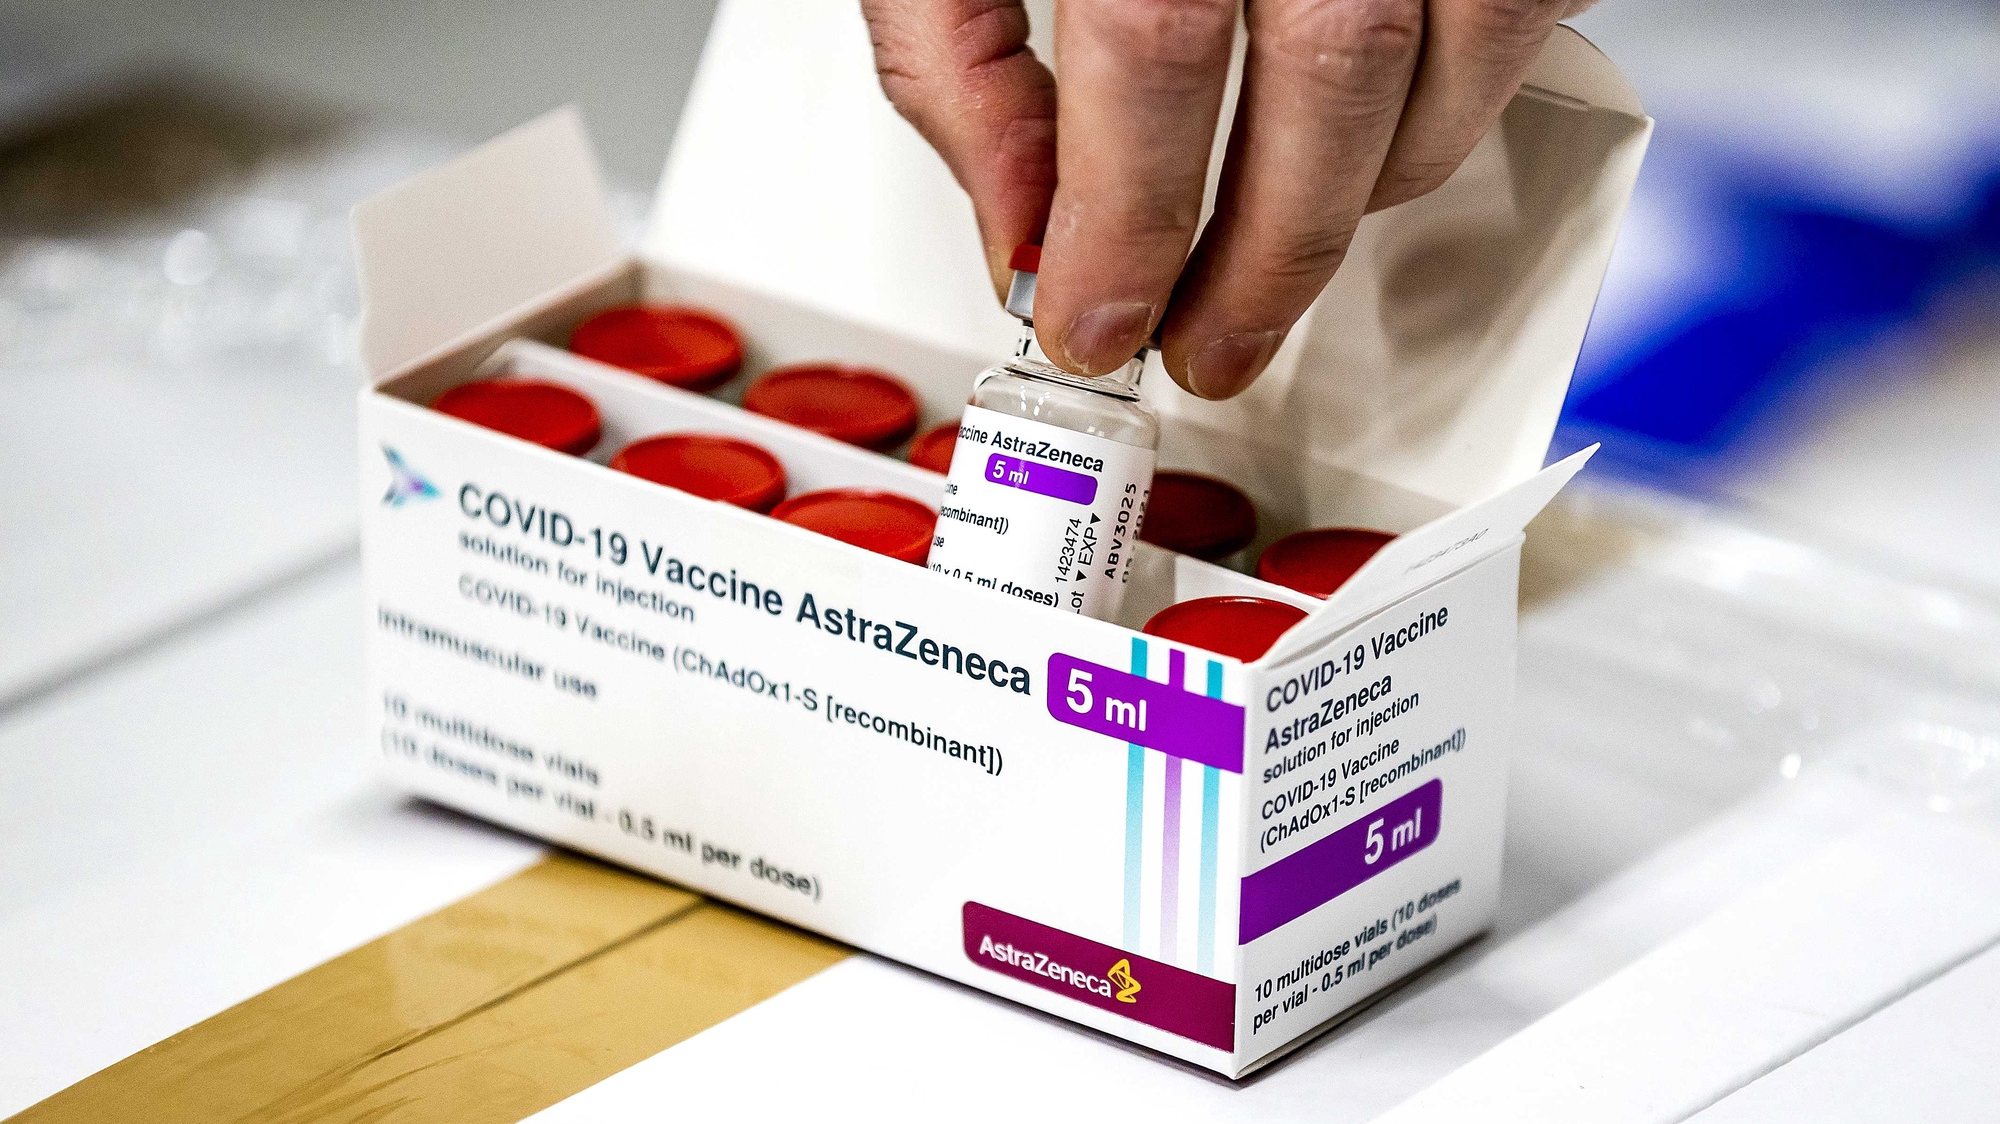 epa09074881 (FILE) - A vial of AstraZeneca&#039;s Covid-19 vaccine stored in Movianto in Oss, The Netherlands, 12 February 2021 (reissued 14 March 2021). The Dutch health ministry on 14 March 2021 said it was suspending the AstraZeneca vaccine rollout, just days after pressing ahead with its use.  EPA/Remko de Waal